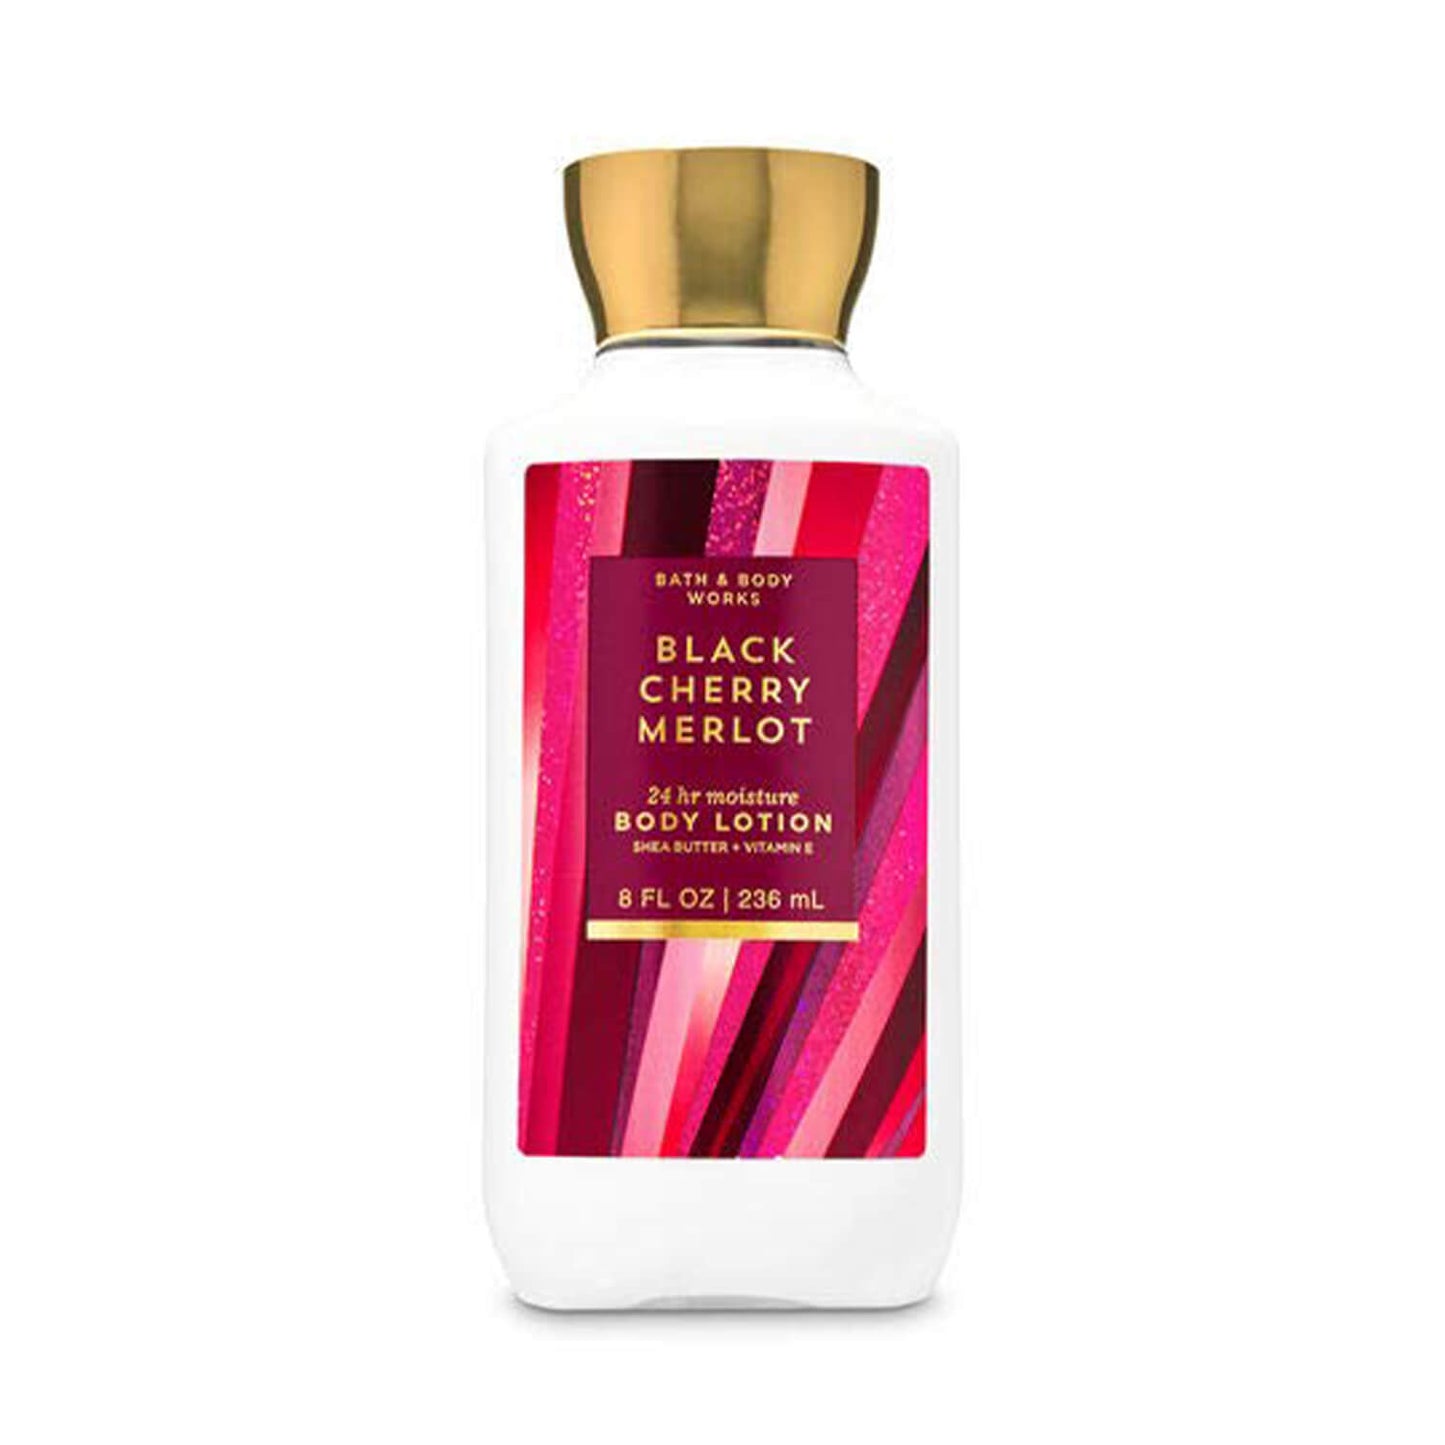 Shop bath and body works lotion in black cherry merlot fragrance available at heygirl.pk for delivery in Pakistan